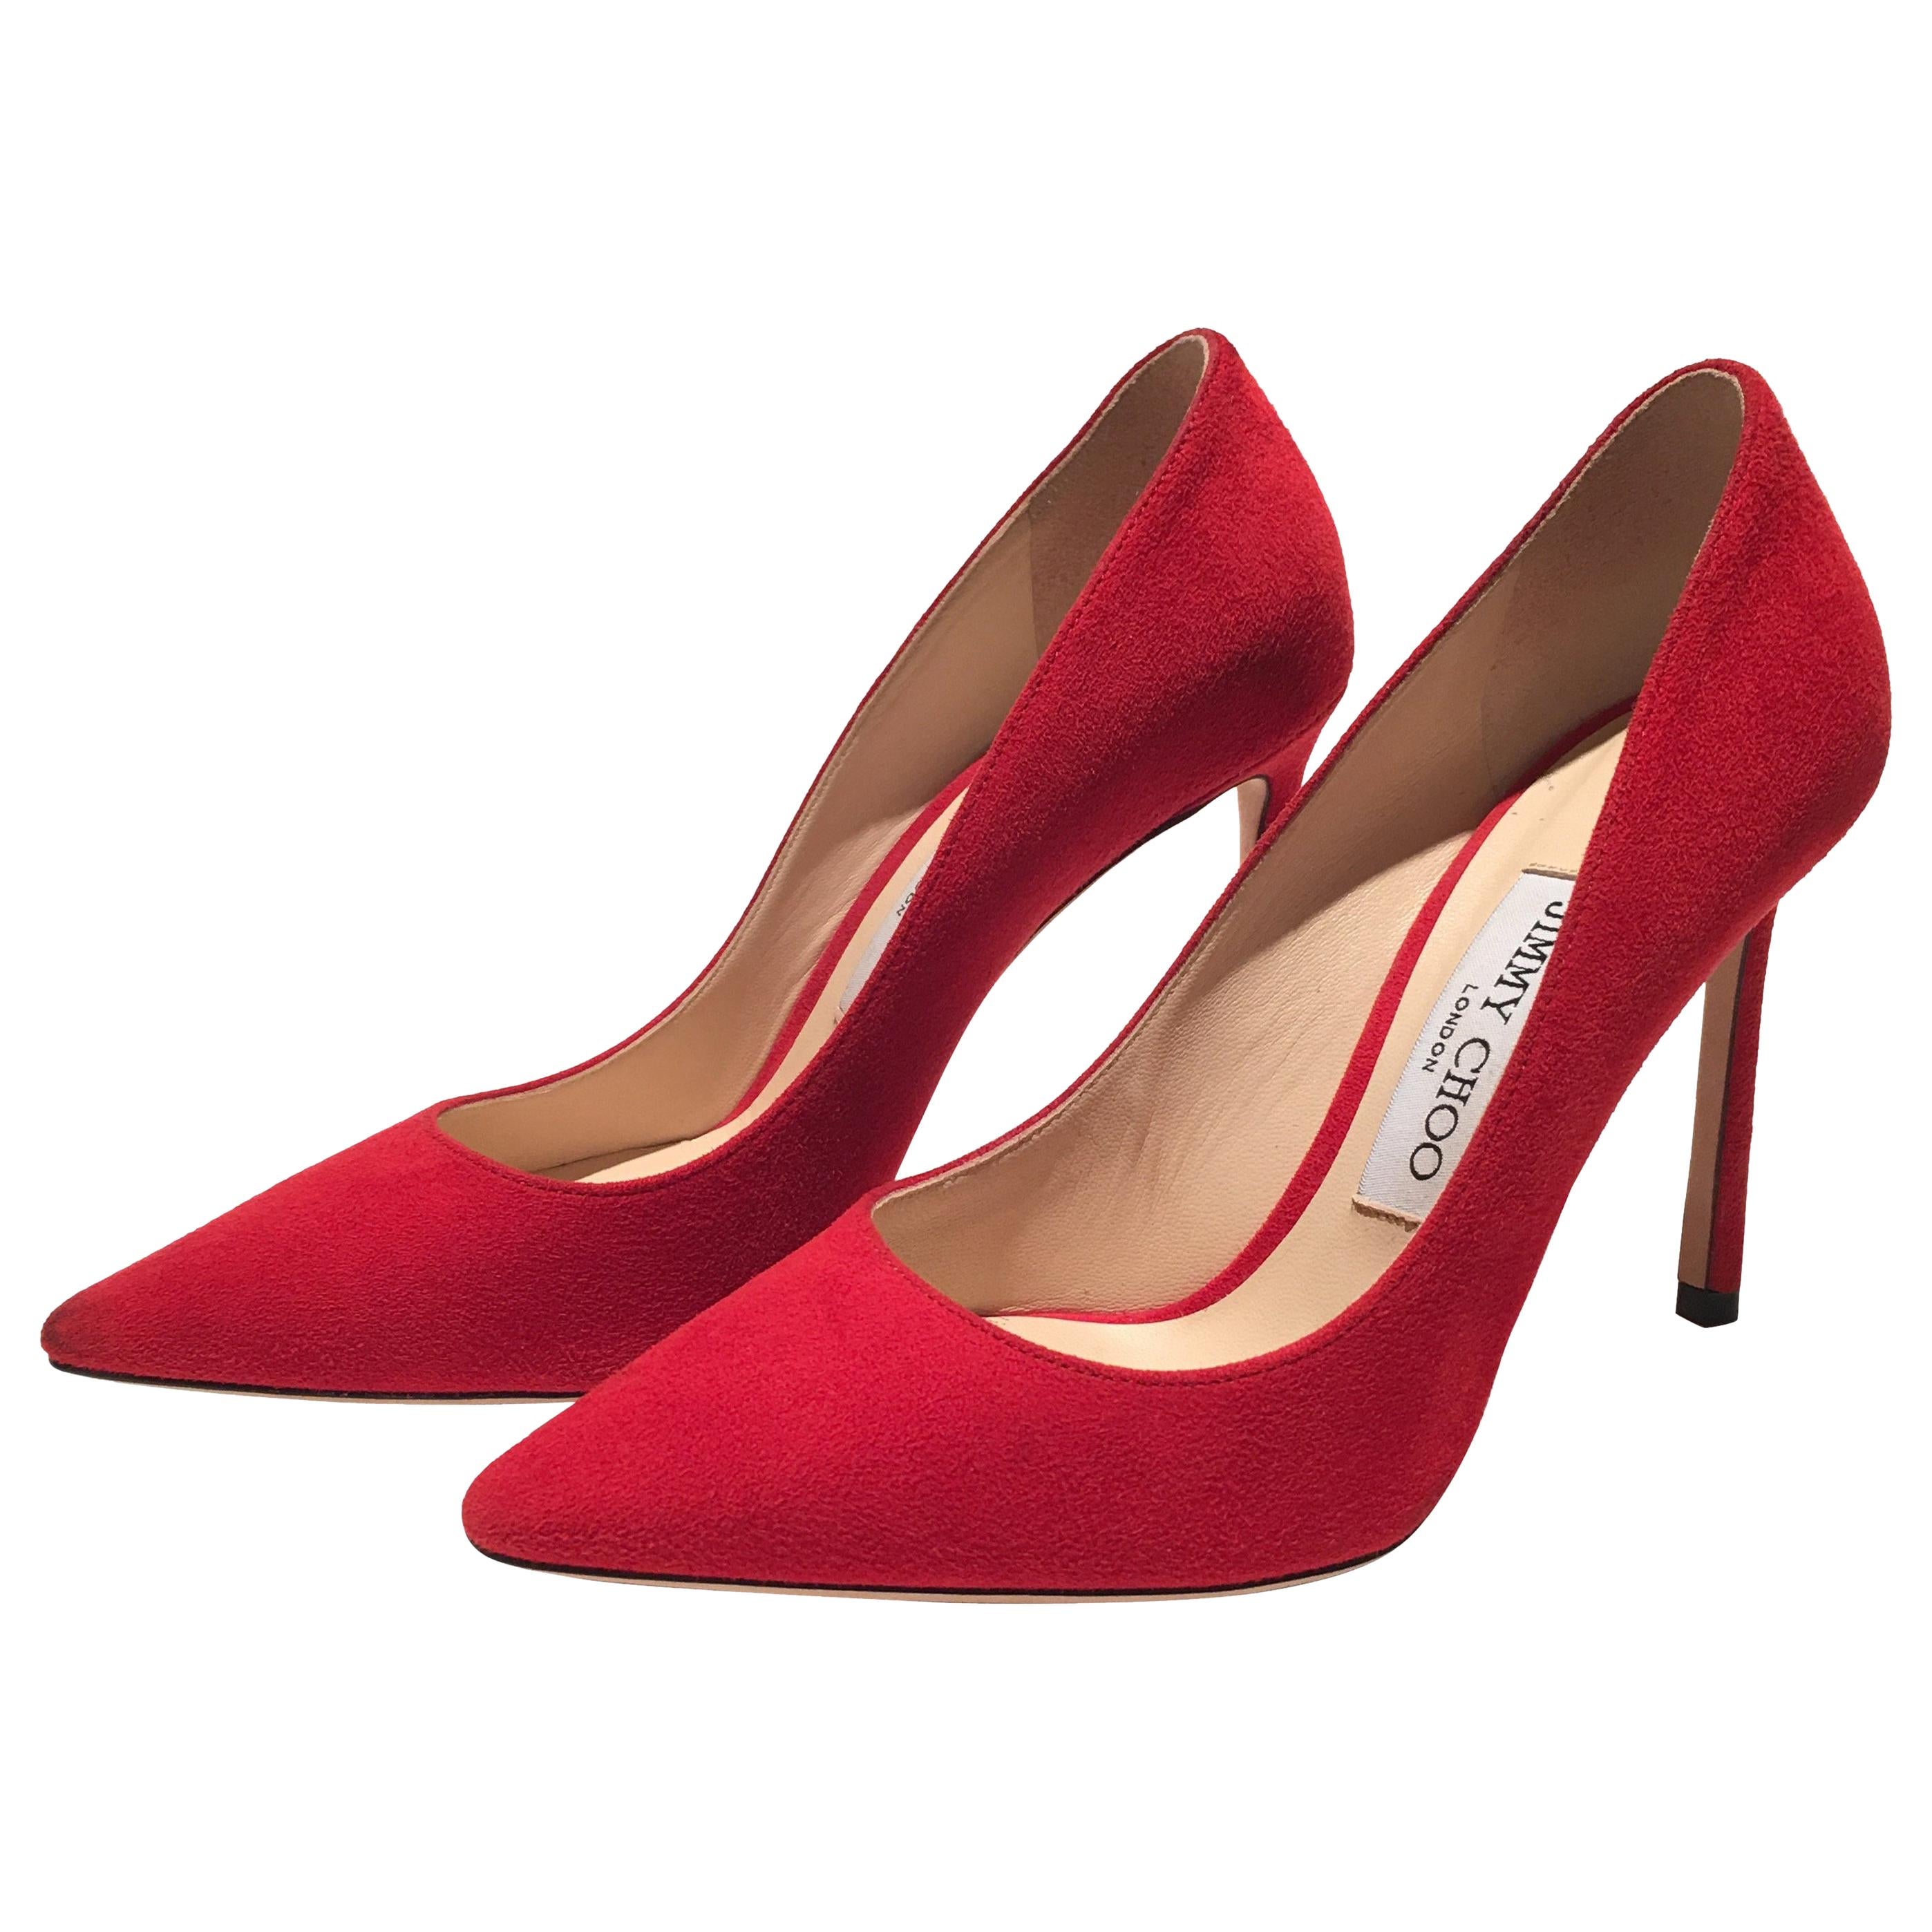 Jimmy Choo London Red Suede Pumps For Sale